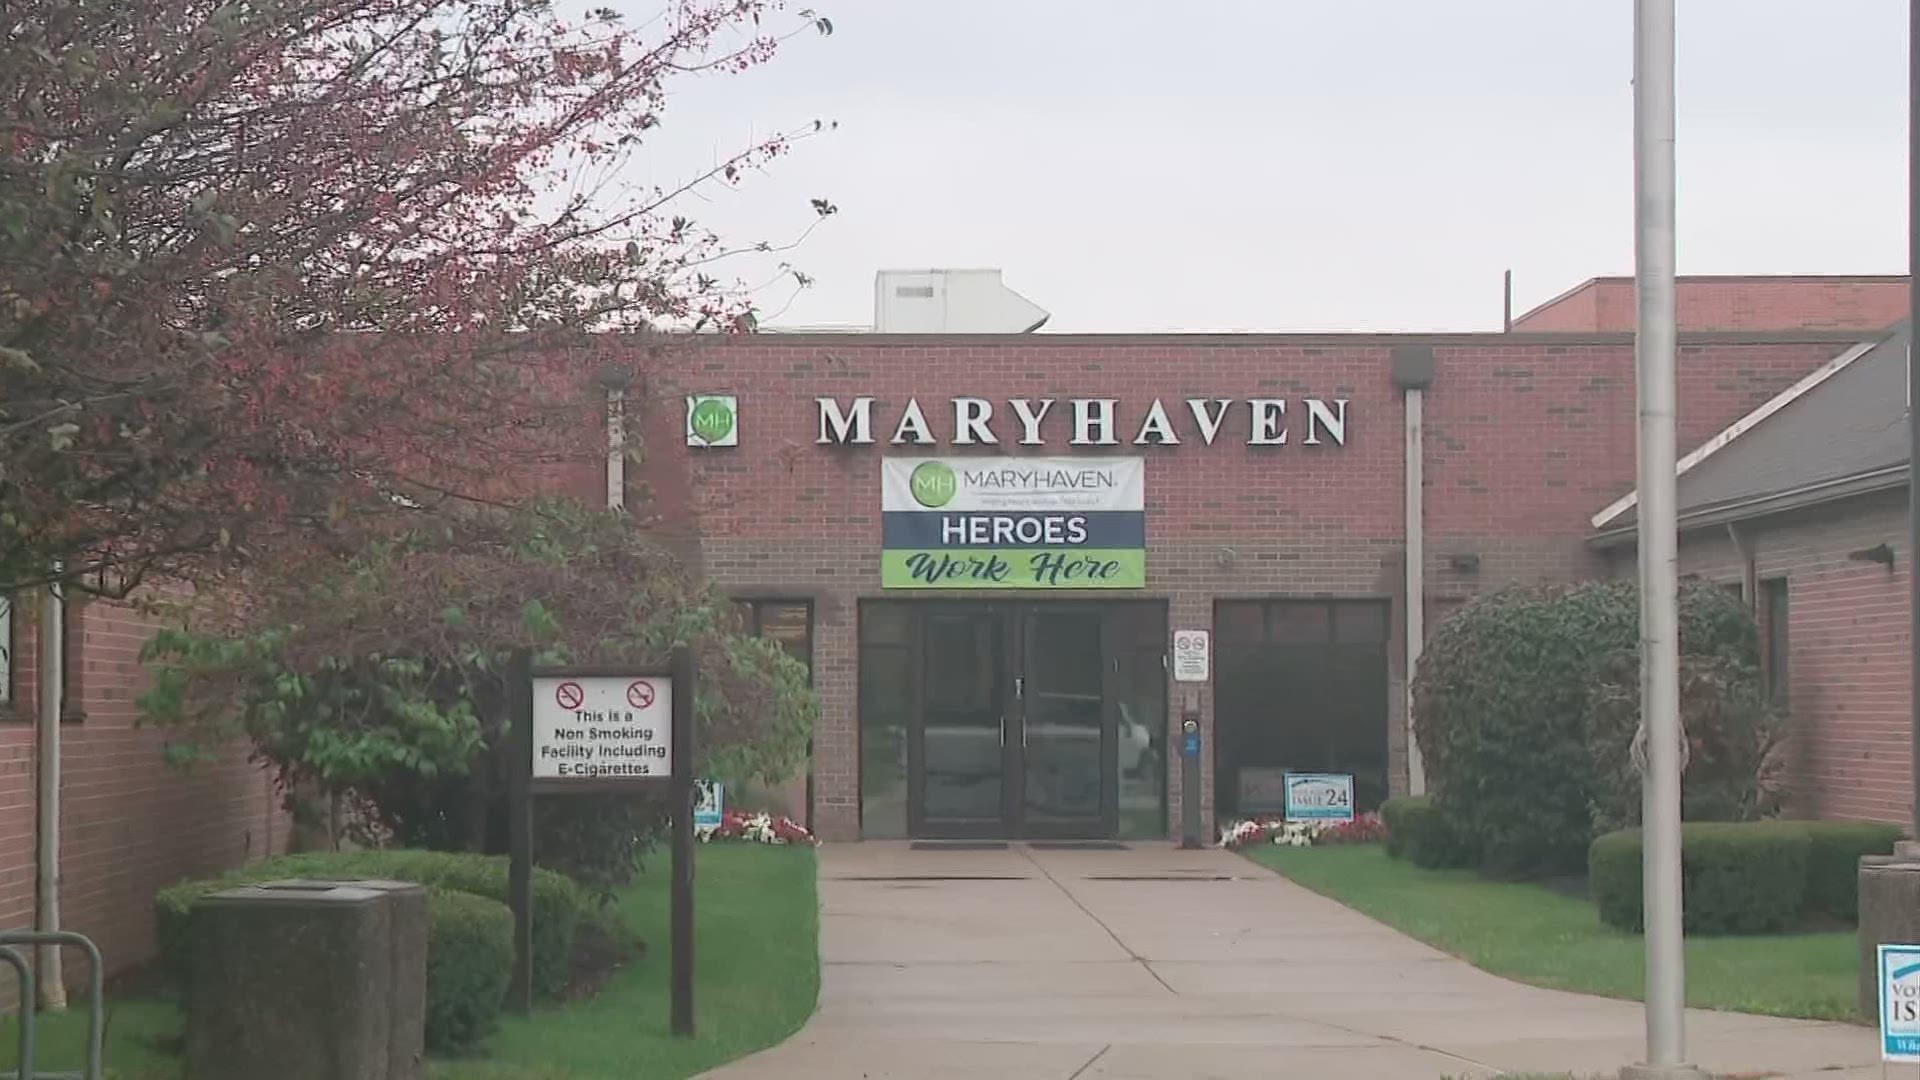 At least 24 children have gone AWOL from Maryhaven in 2020, according to the Franklin County Sheriff's Office.